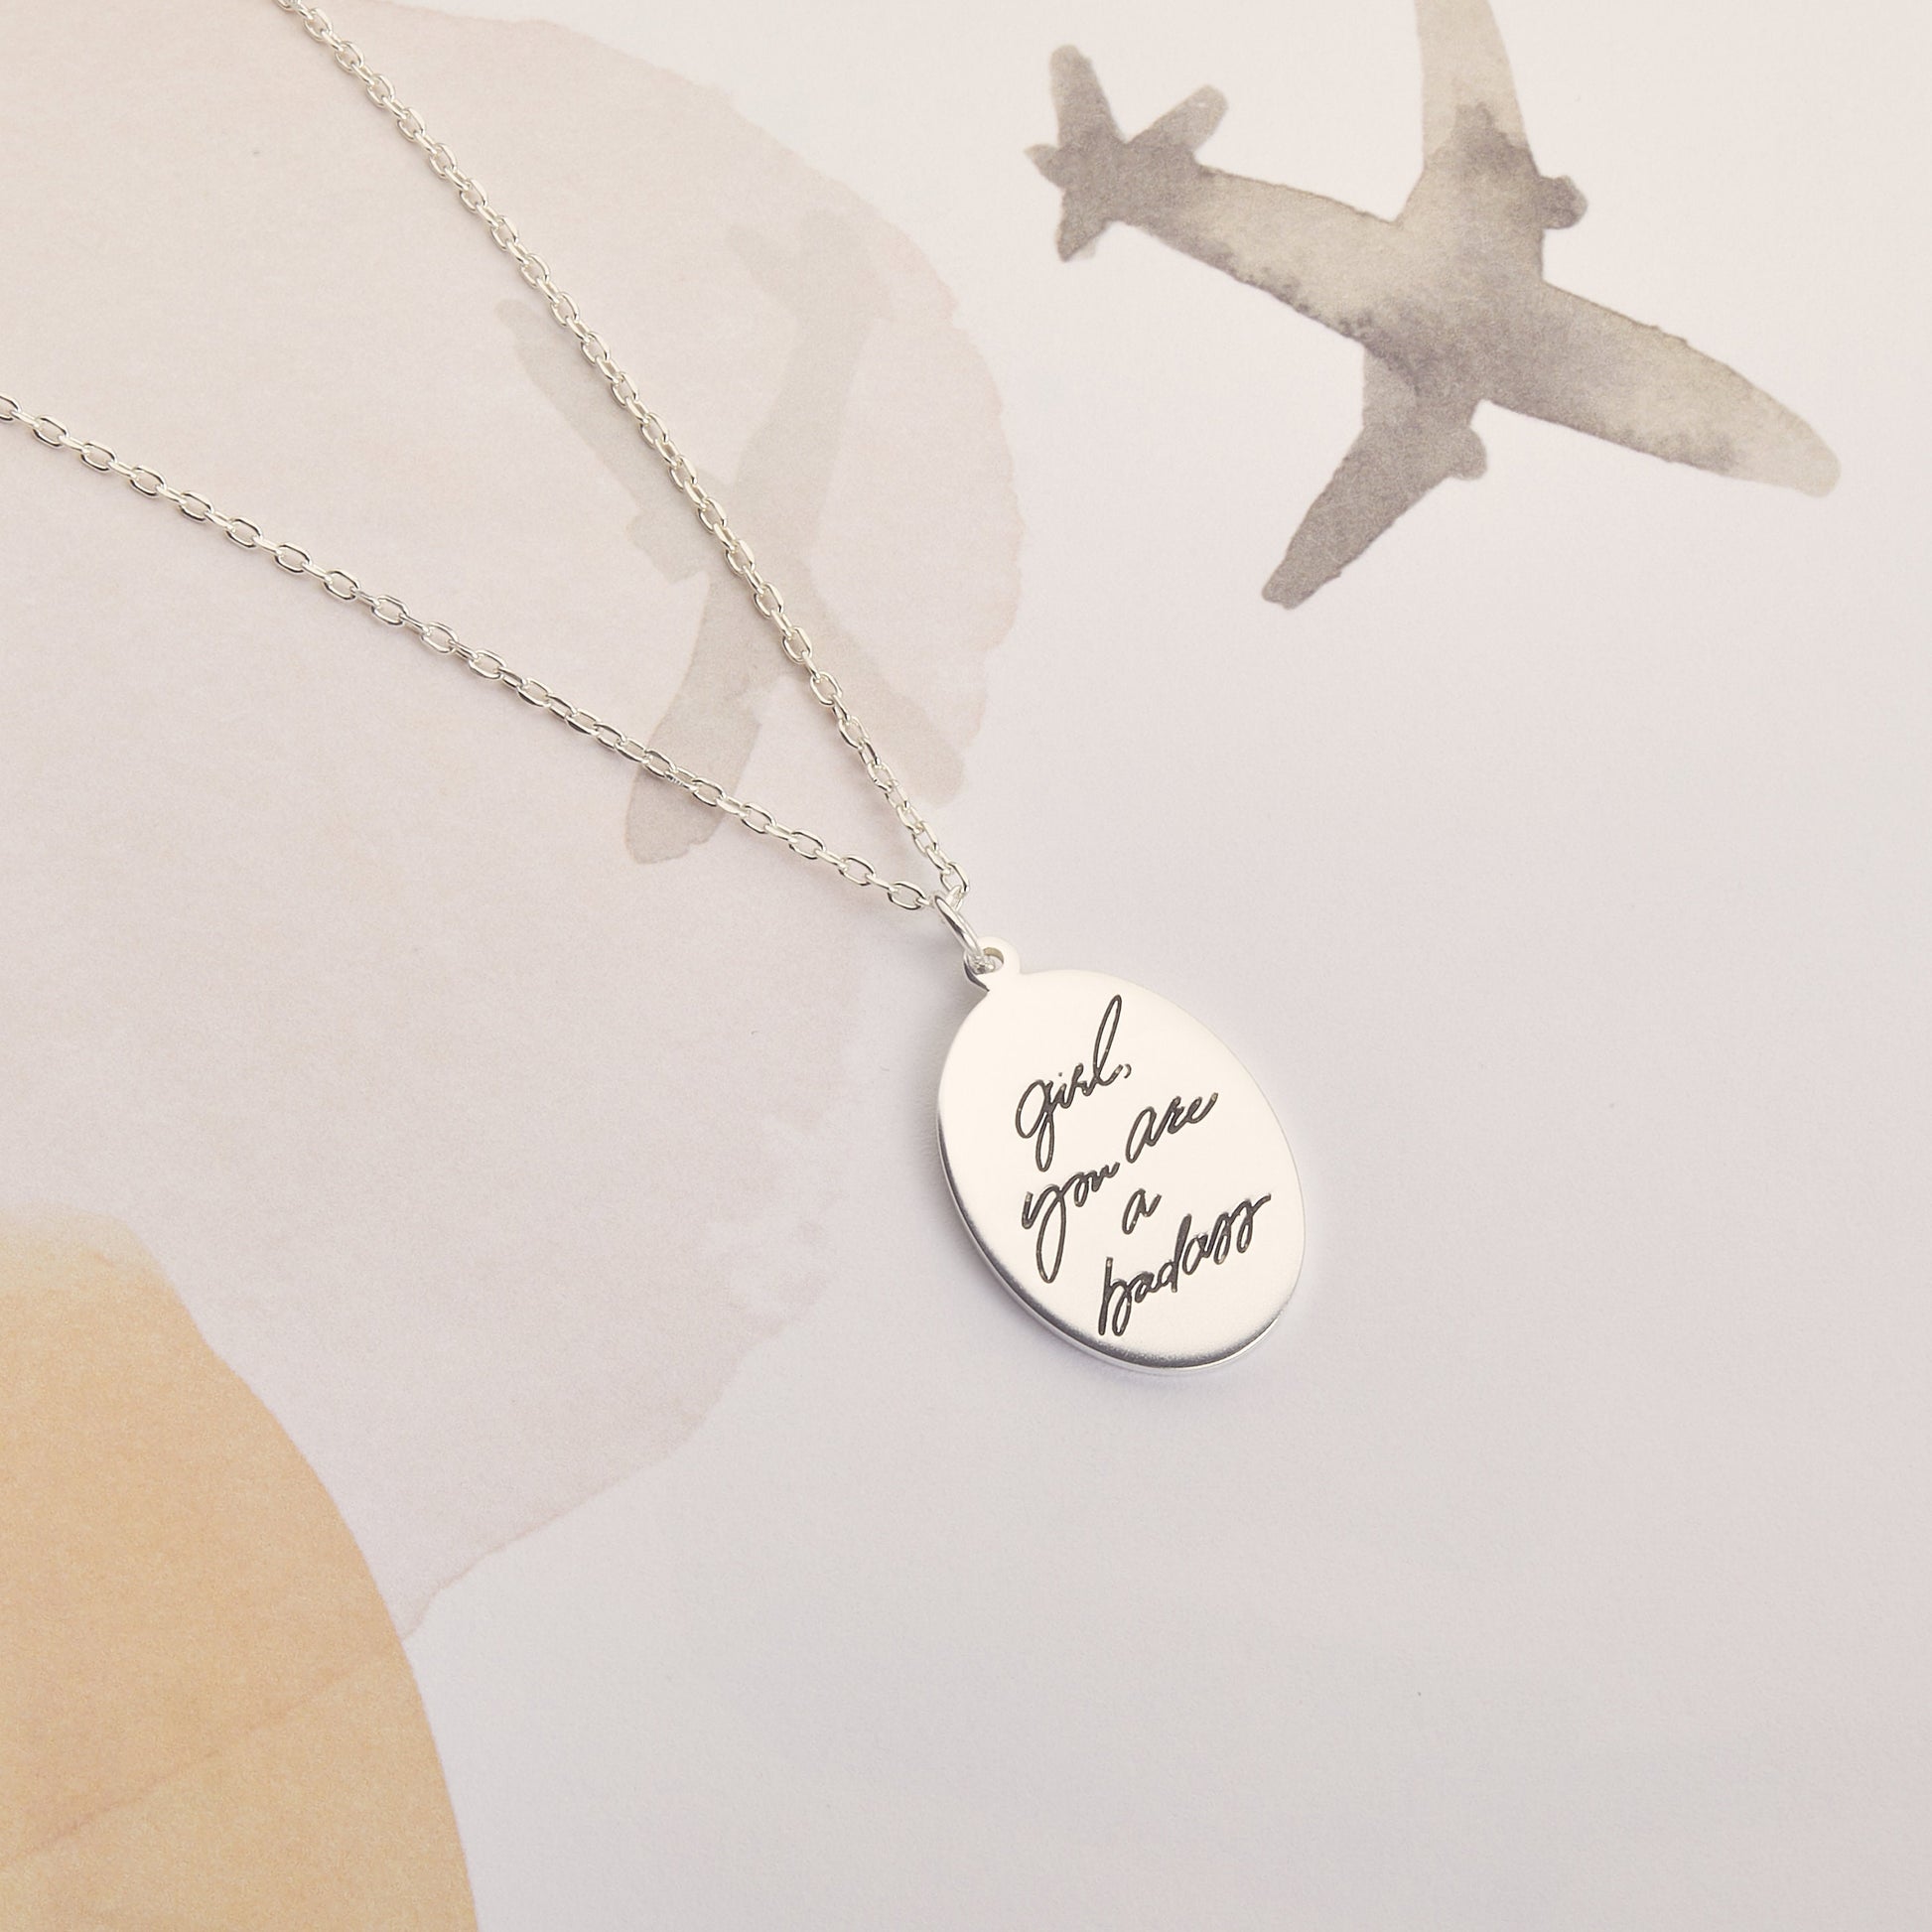 Children Name Oval Necklace |  Signature necklace | Thumbprint necklace | Handwriting Necklace | Memorial Necklace | Remembrance necklace